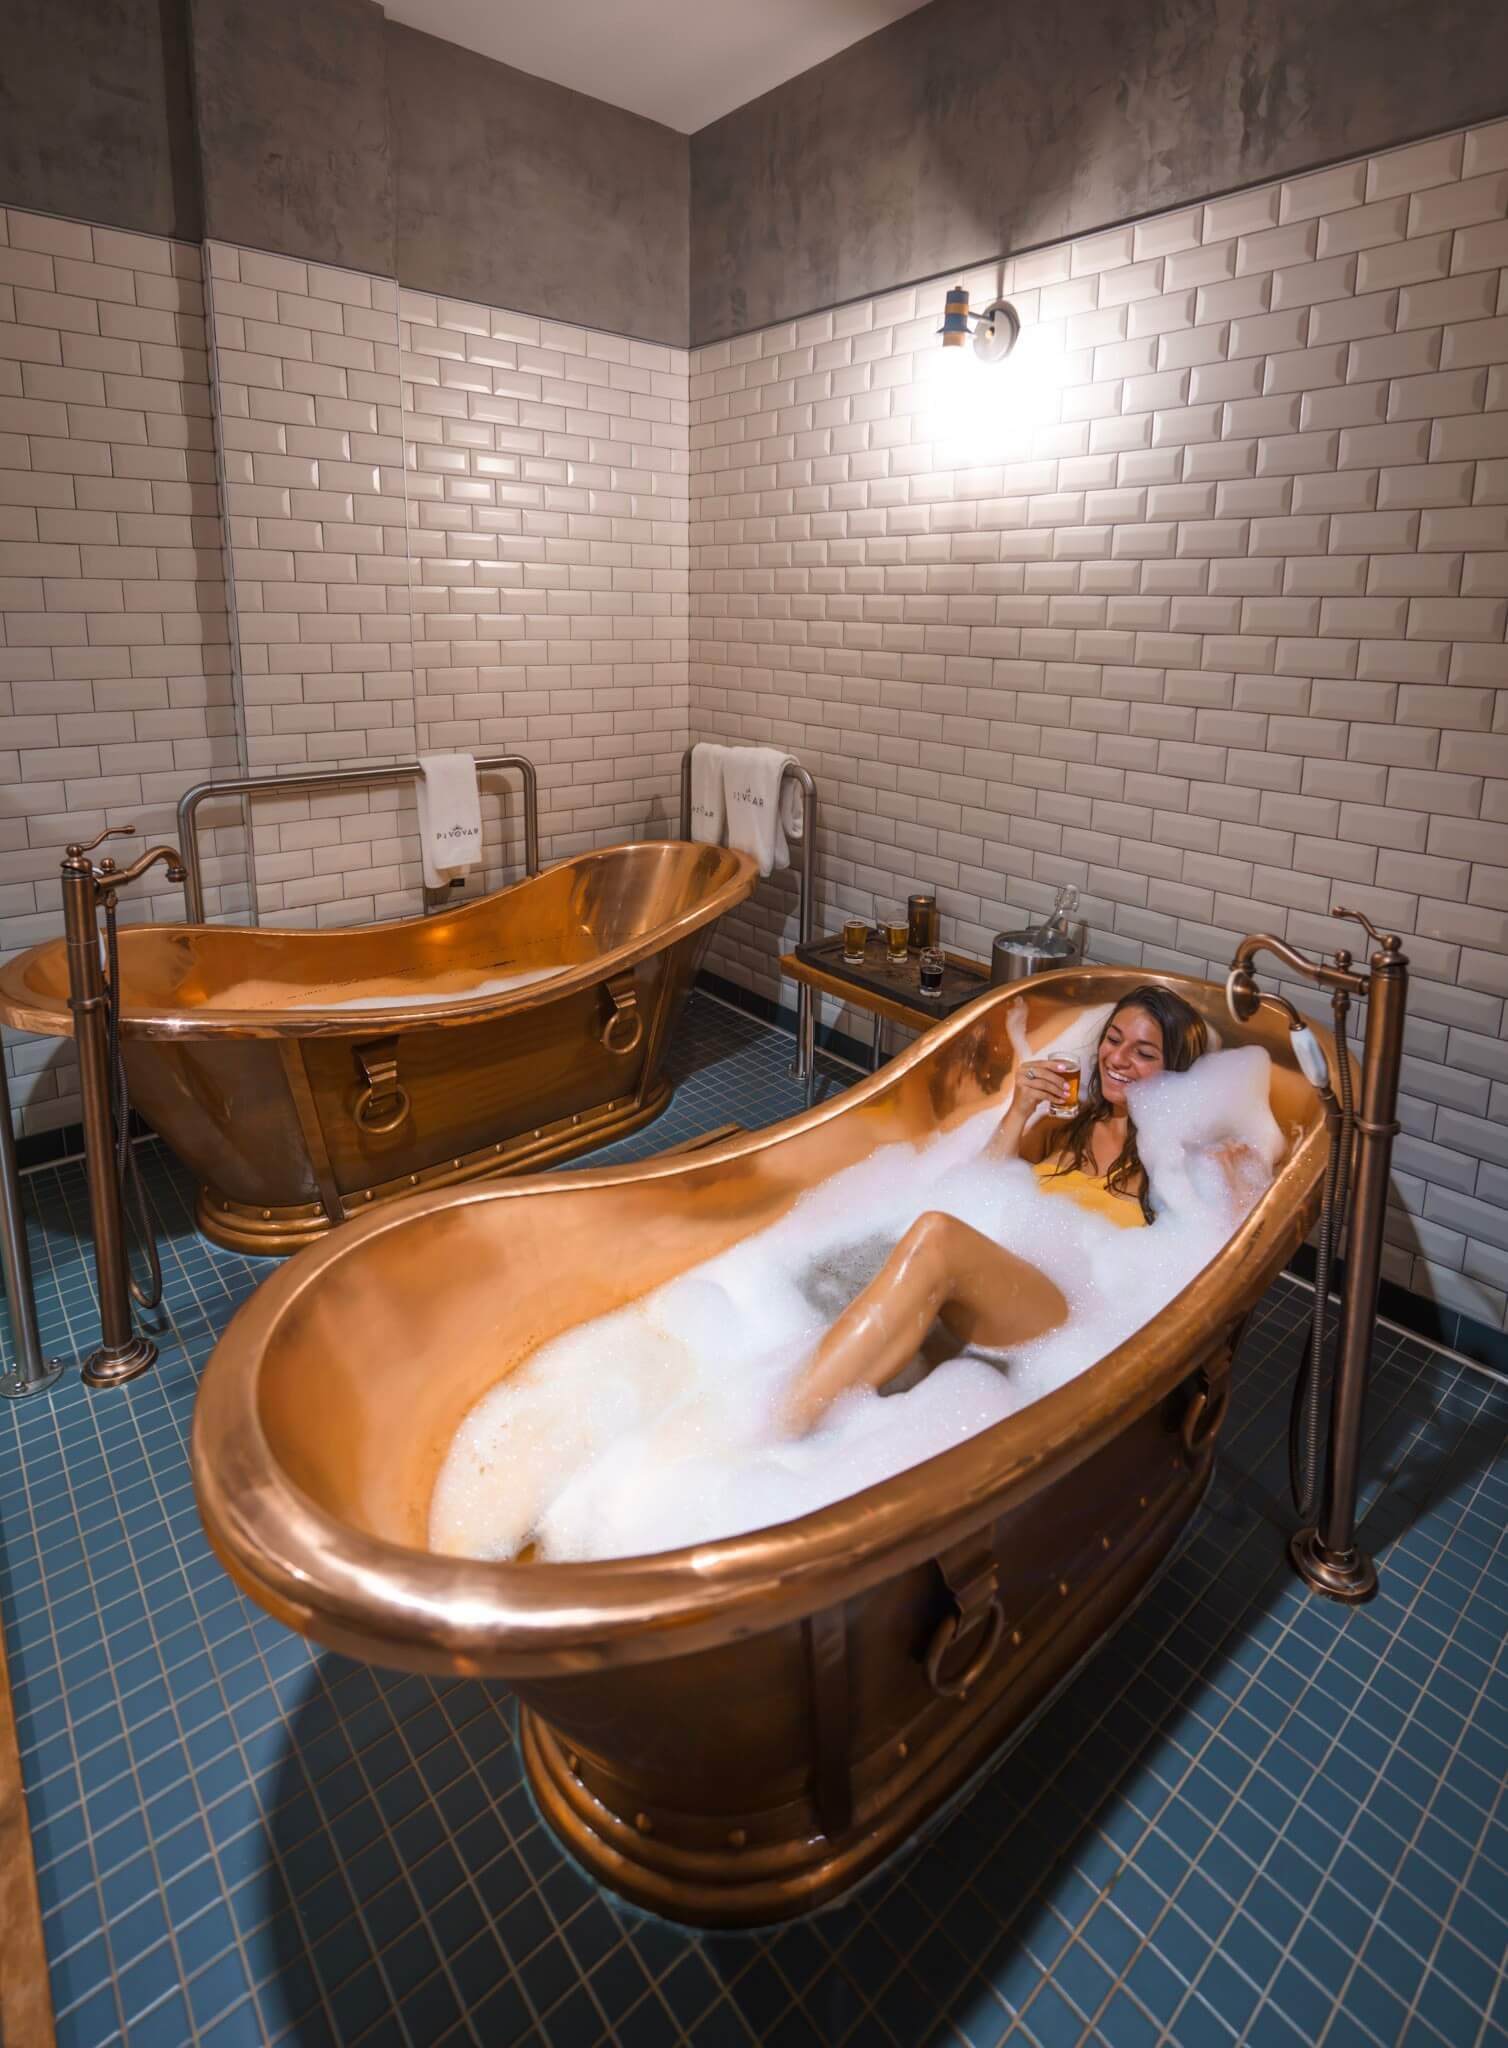 beer spa in Waco, places to visit in Texas